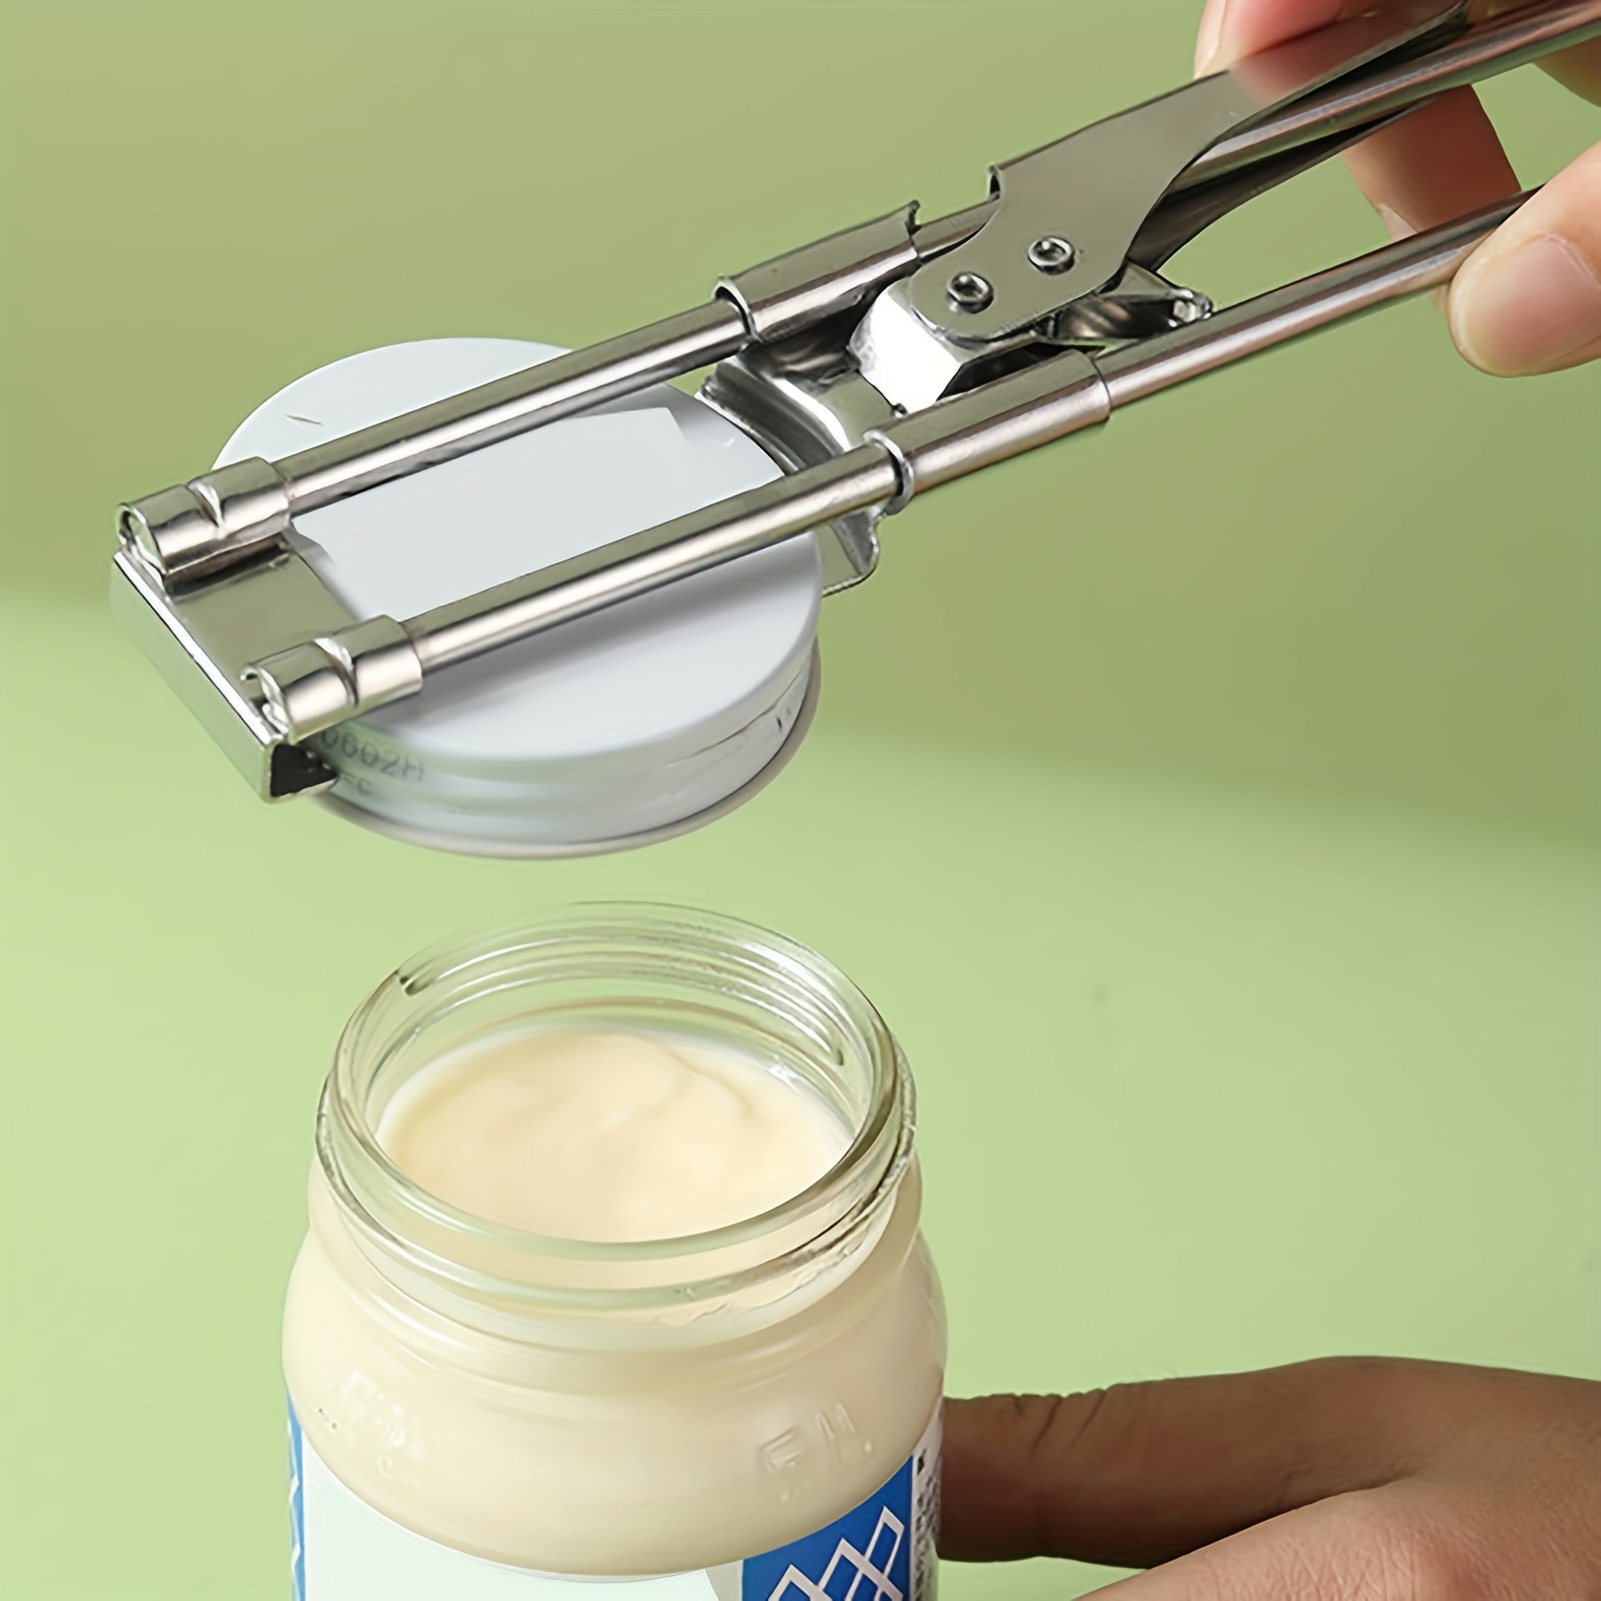 Universal Manual Can Opener Easy Twist Release for Bottles and